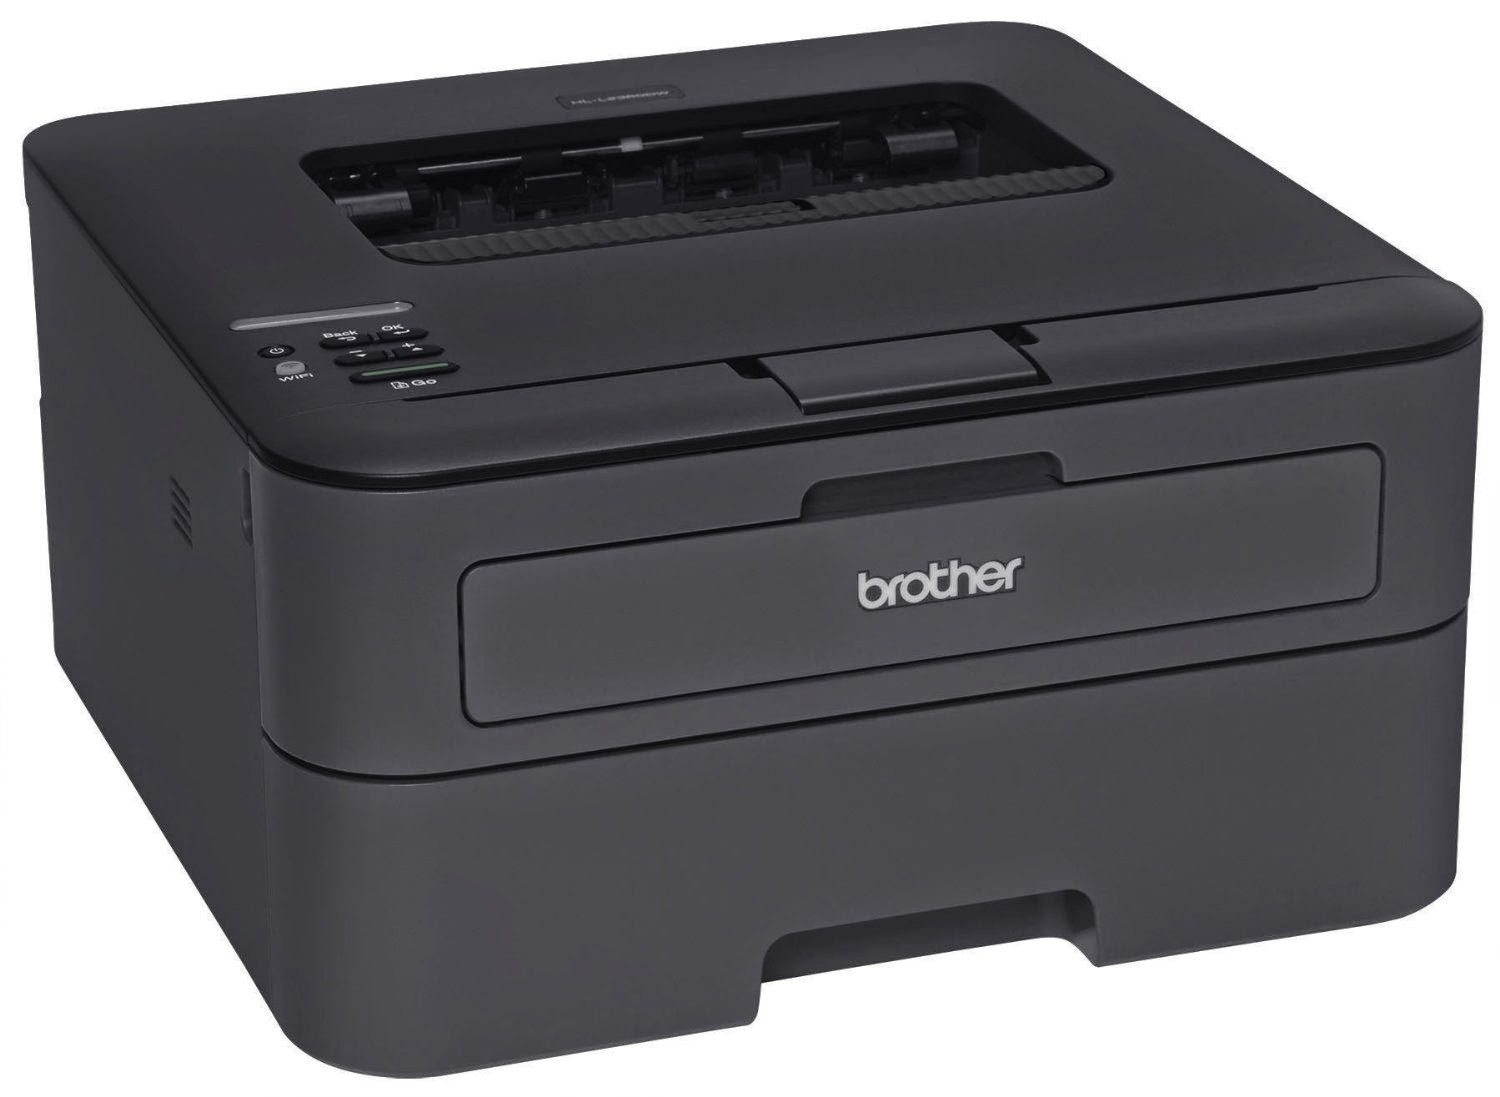 Brother Laser Printer HLL2340DW Monochrome Laser Printer with Wireless Networking and Automatic Duplex Printing